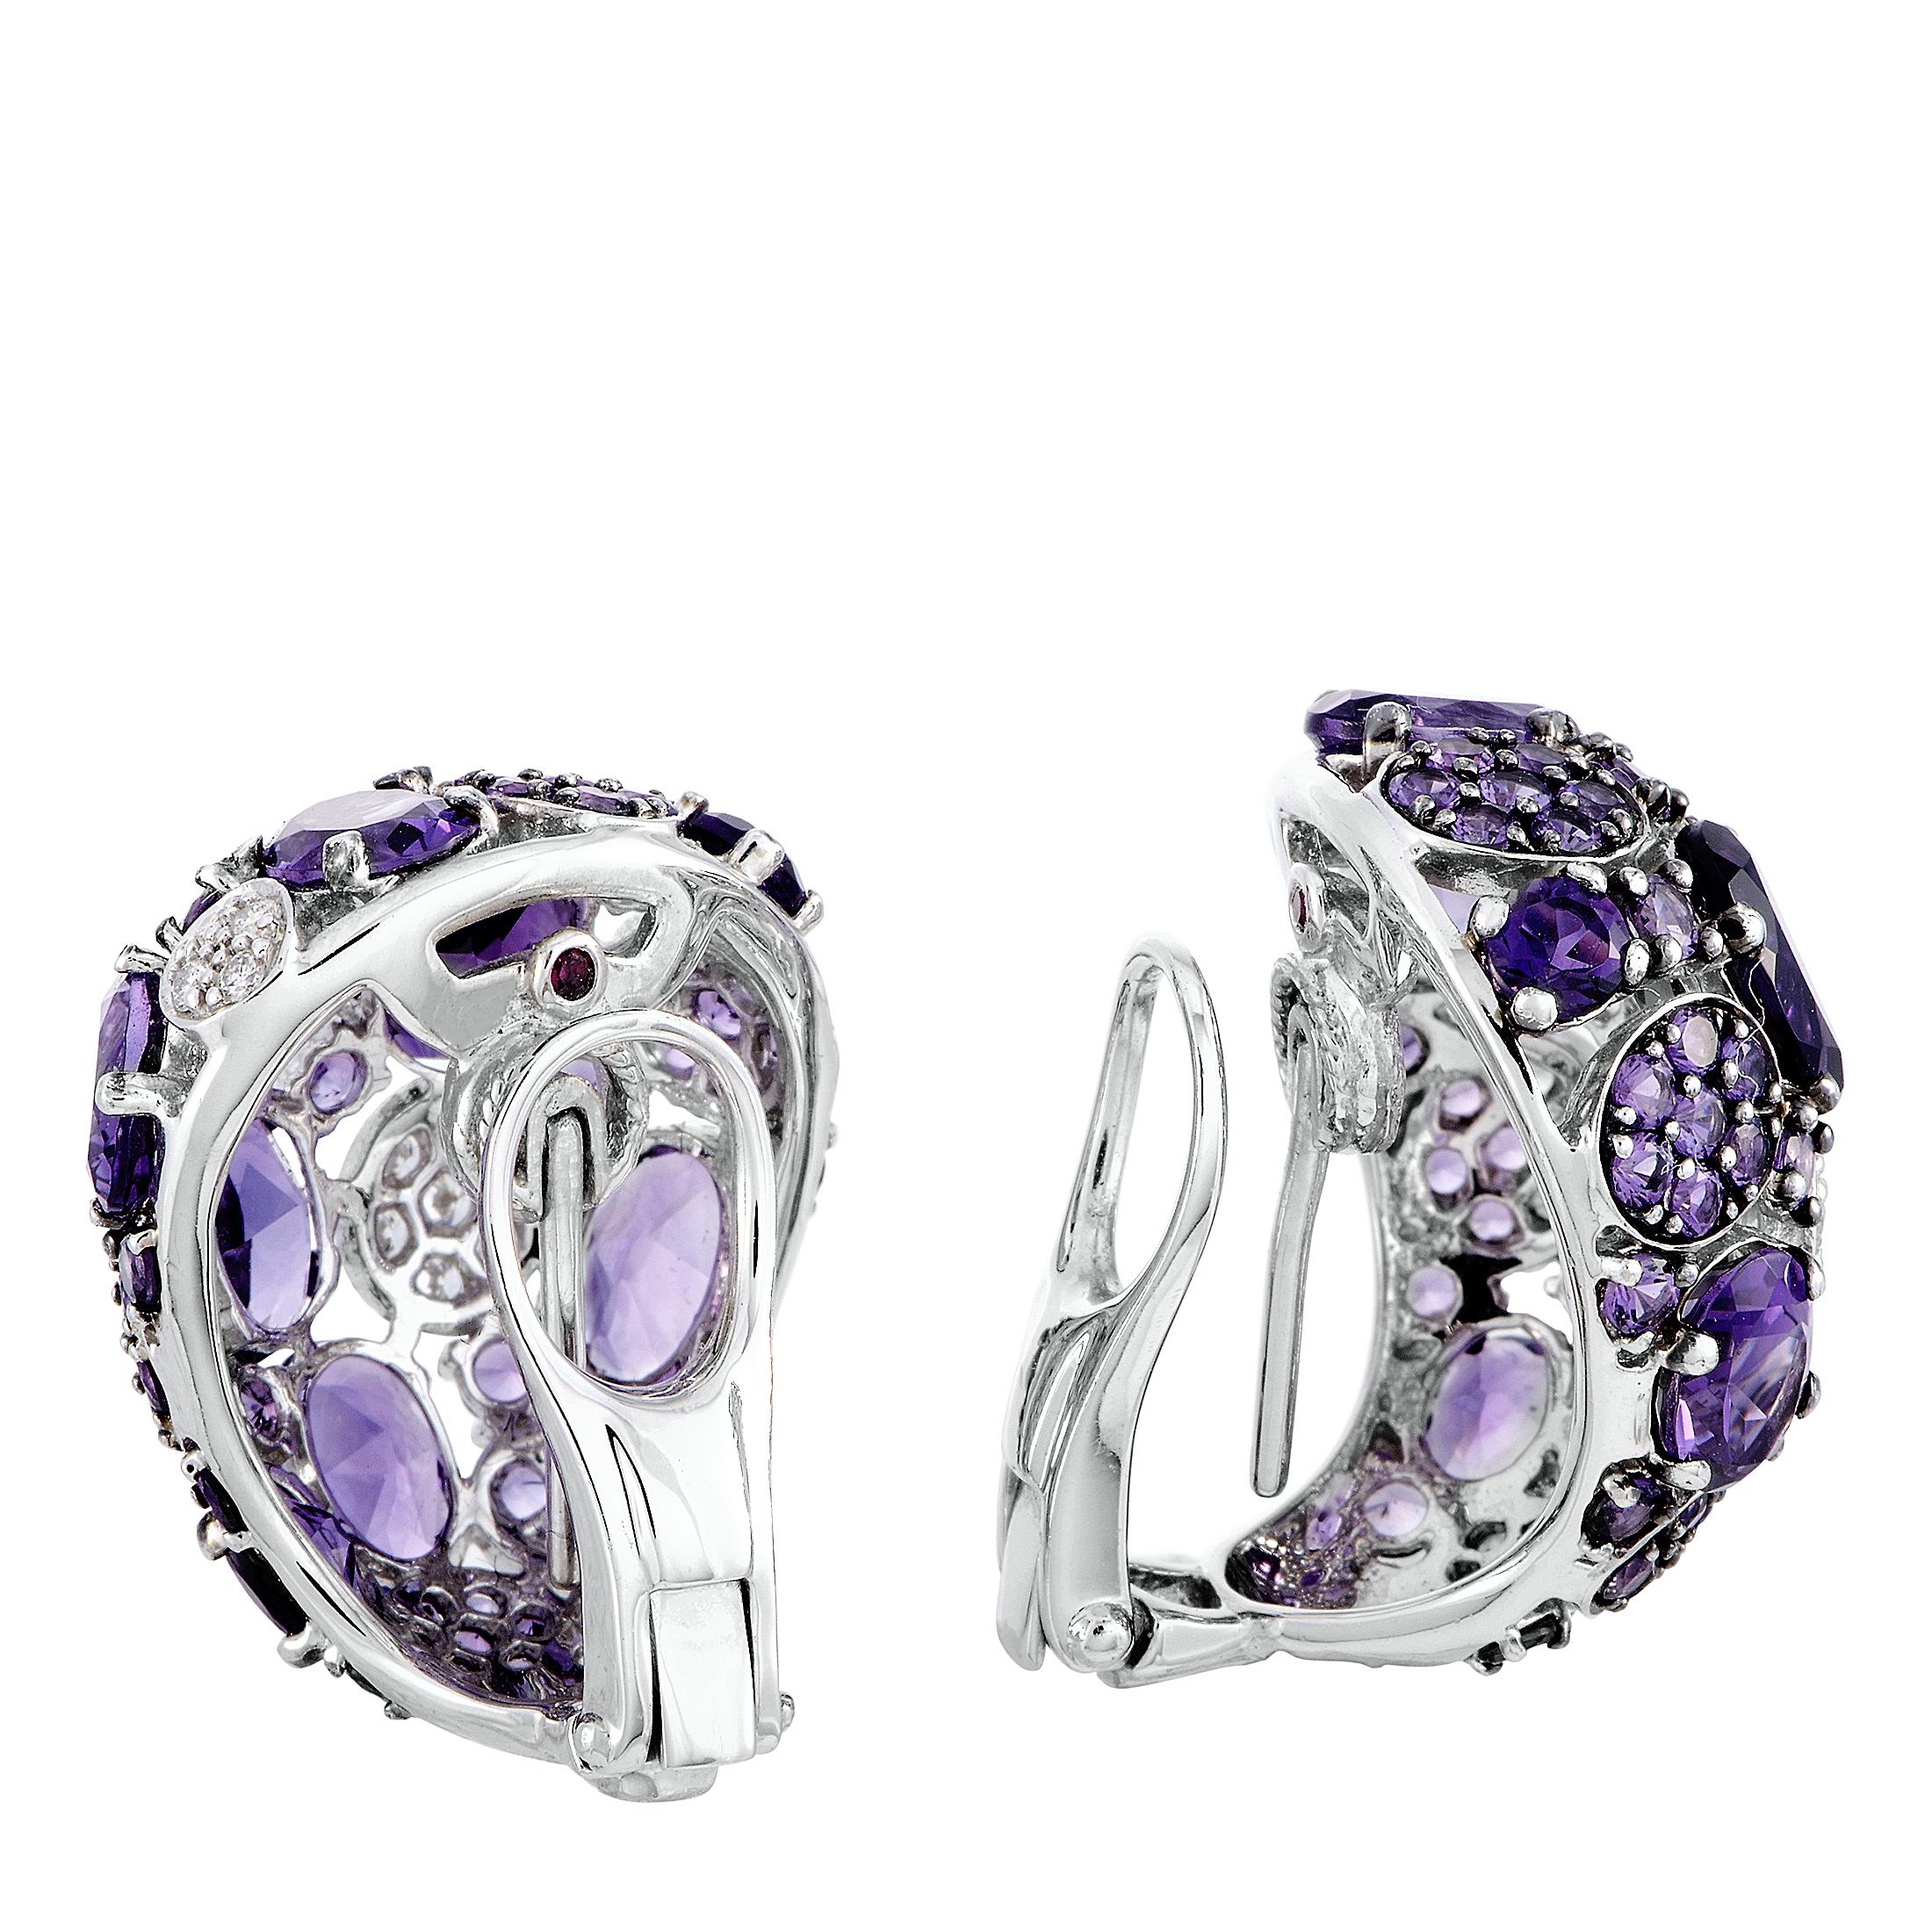 The Roberto Coin “Shanghai” earrings are crafted from 18K white gold and each weighs 10 grams, measuring 0.90” in length and 0.75” in width. The earrings are embellished with amethysts and a total of 0.36 carats of diamonds.

The pair is offered in